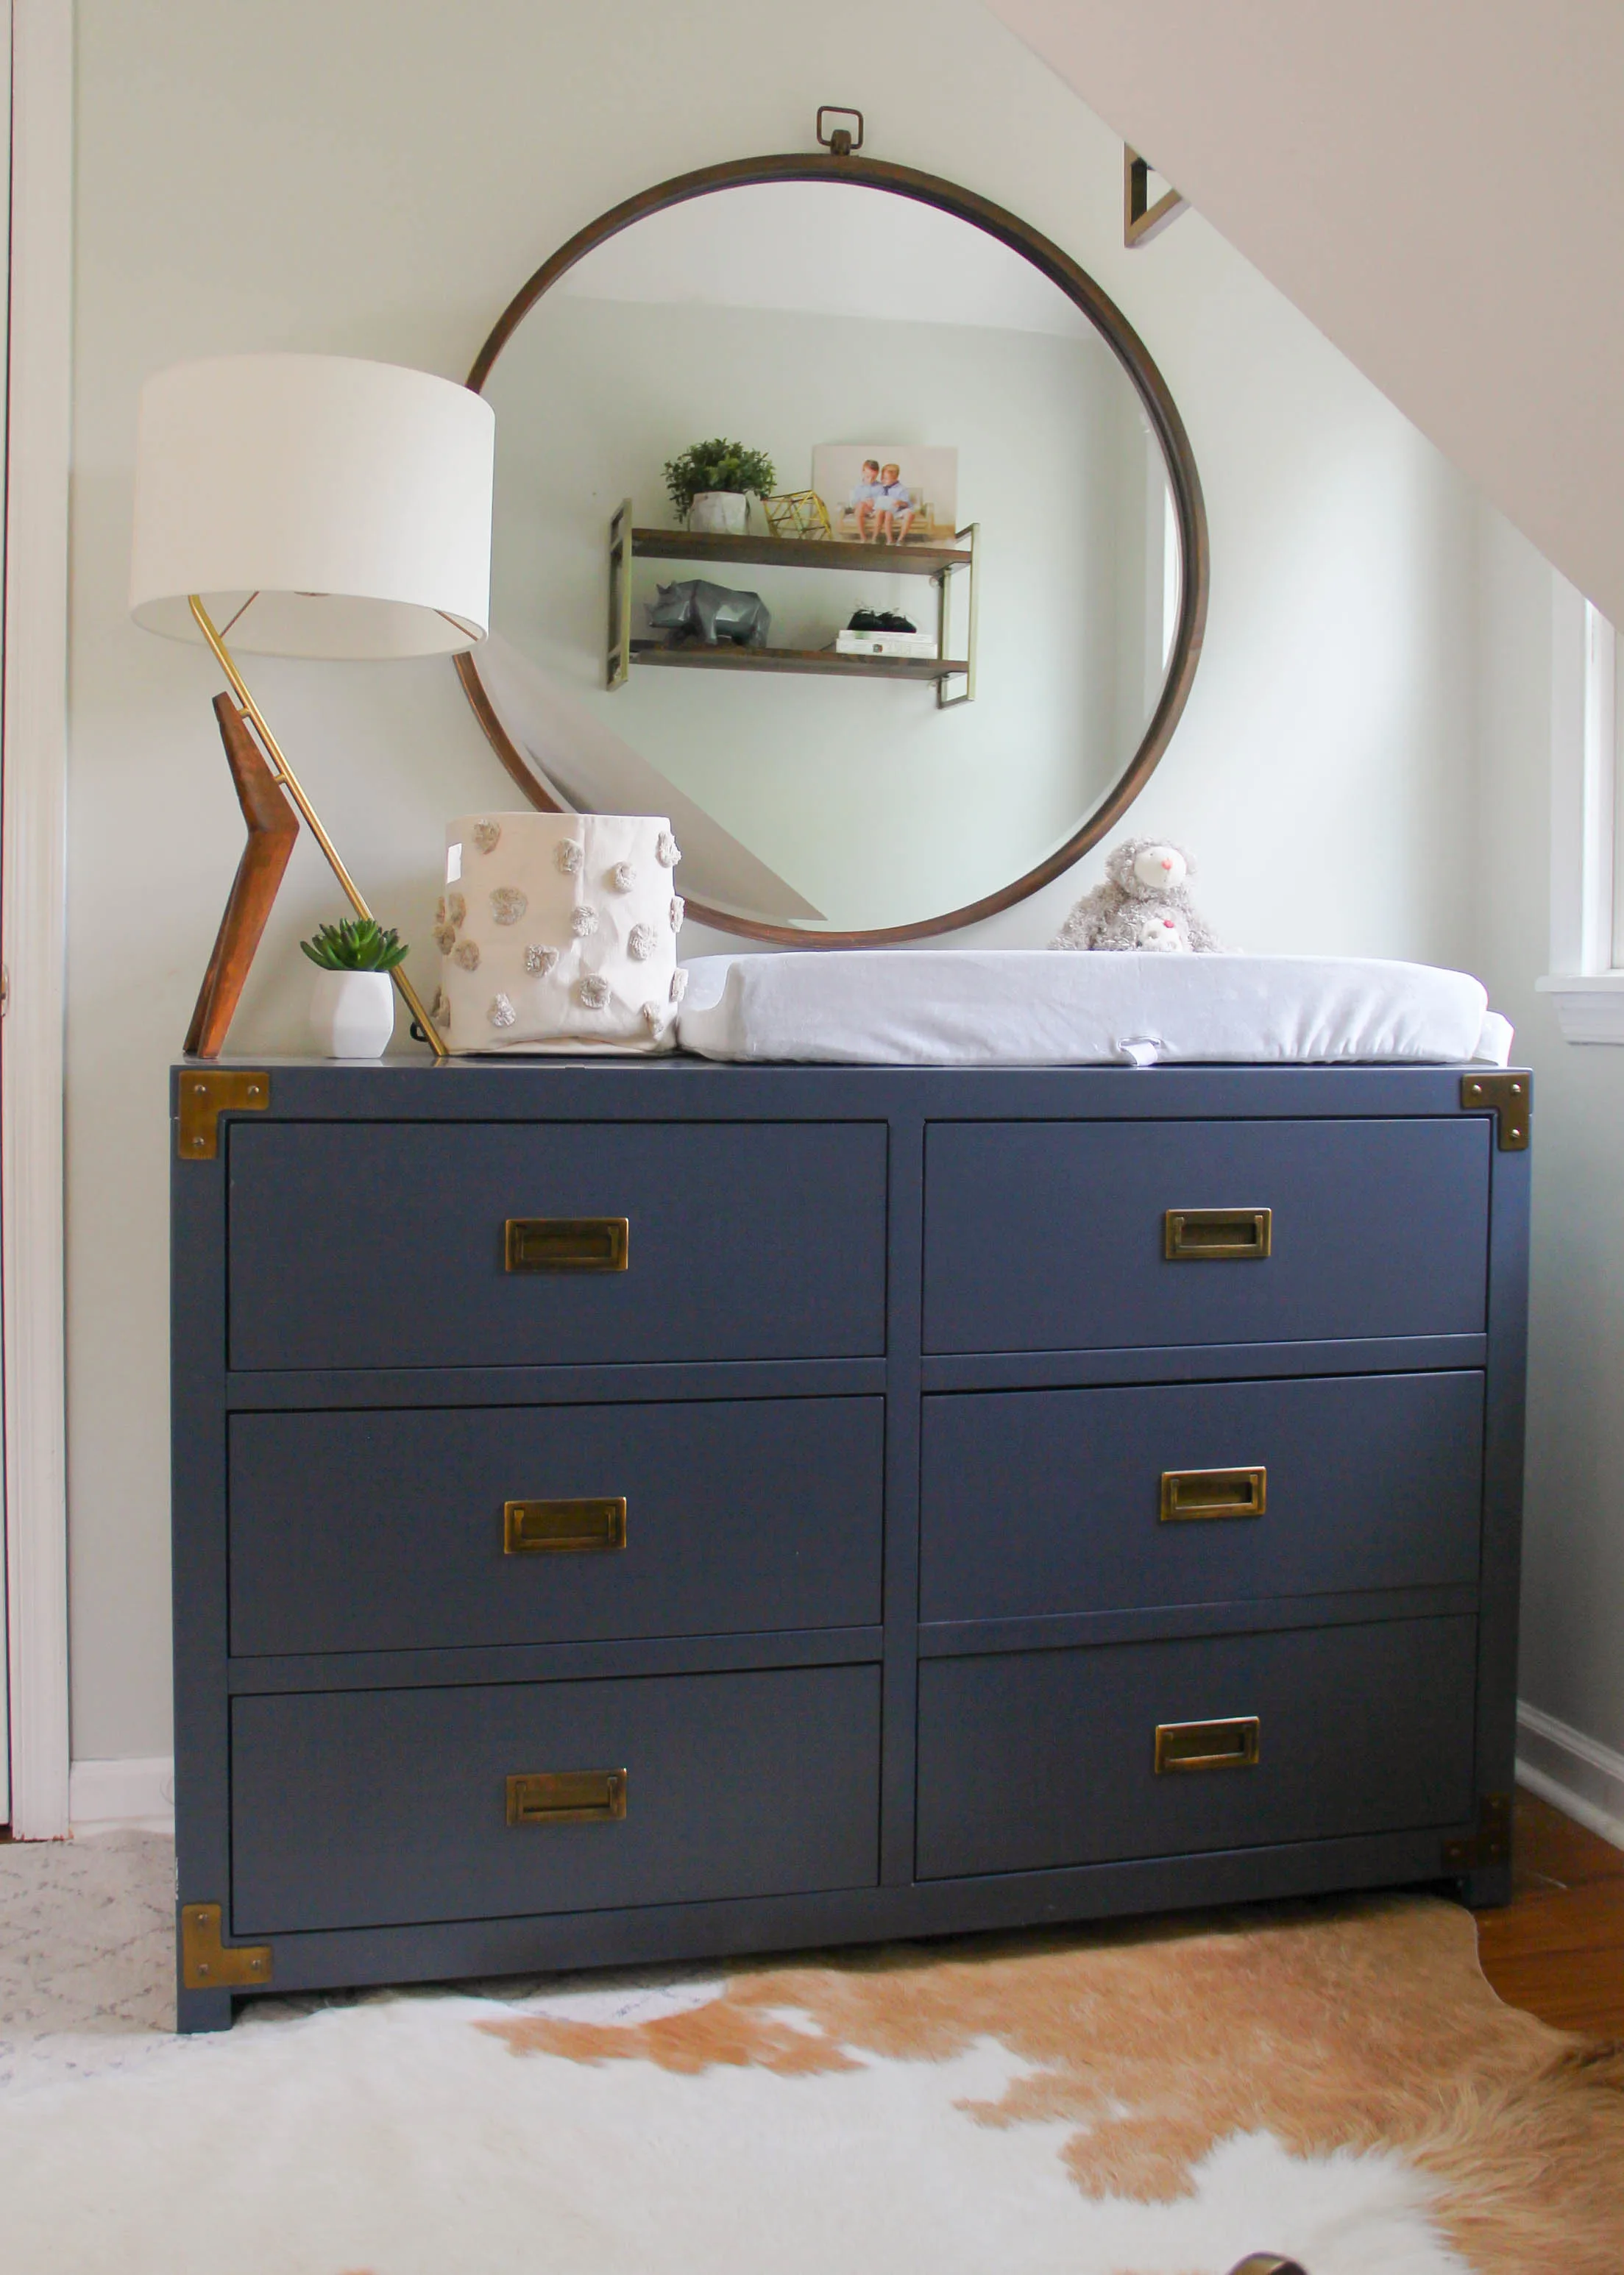 Eclectic Boy's Nursery with Navy Campaign Dresser